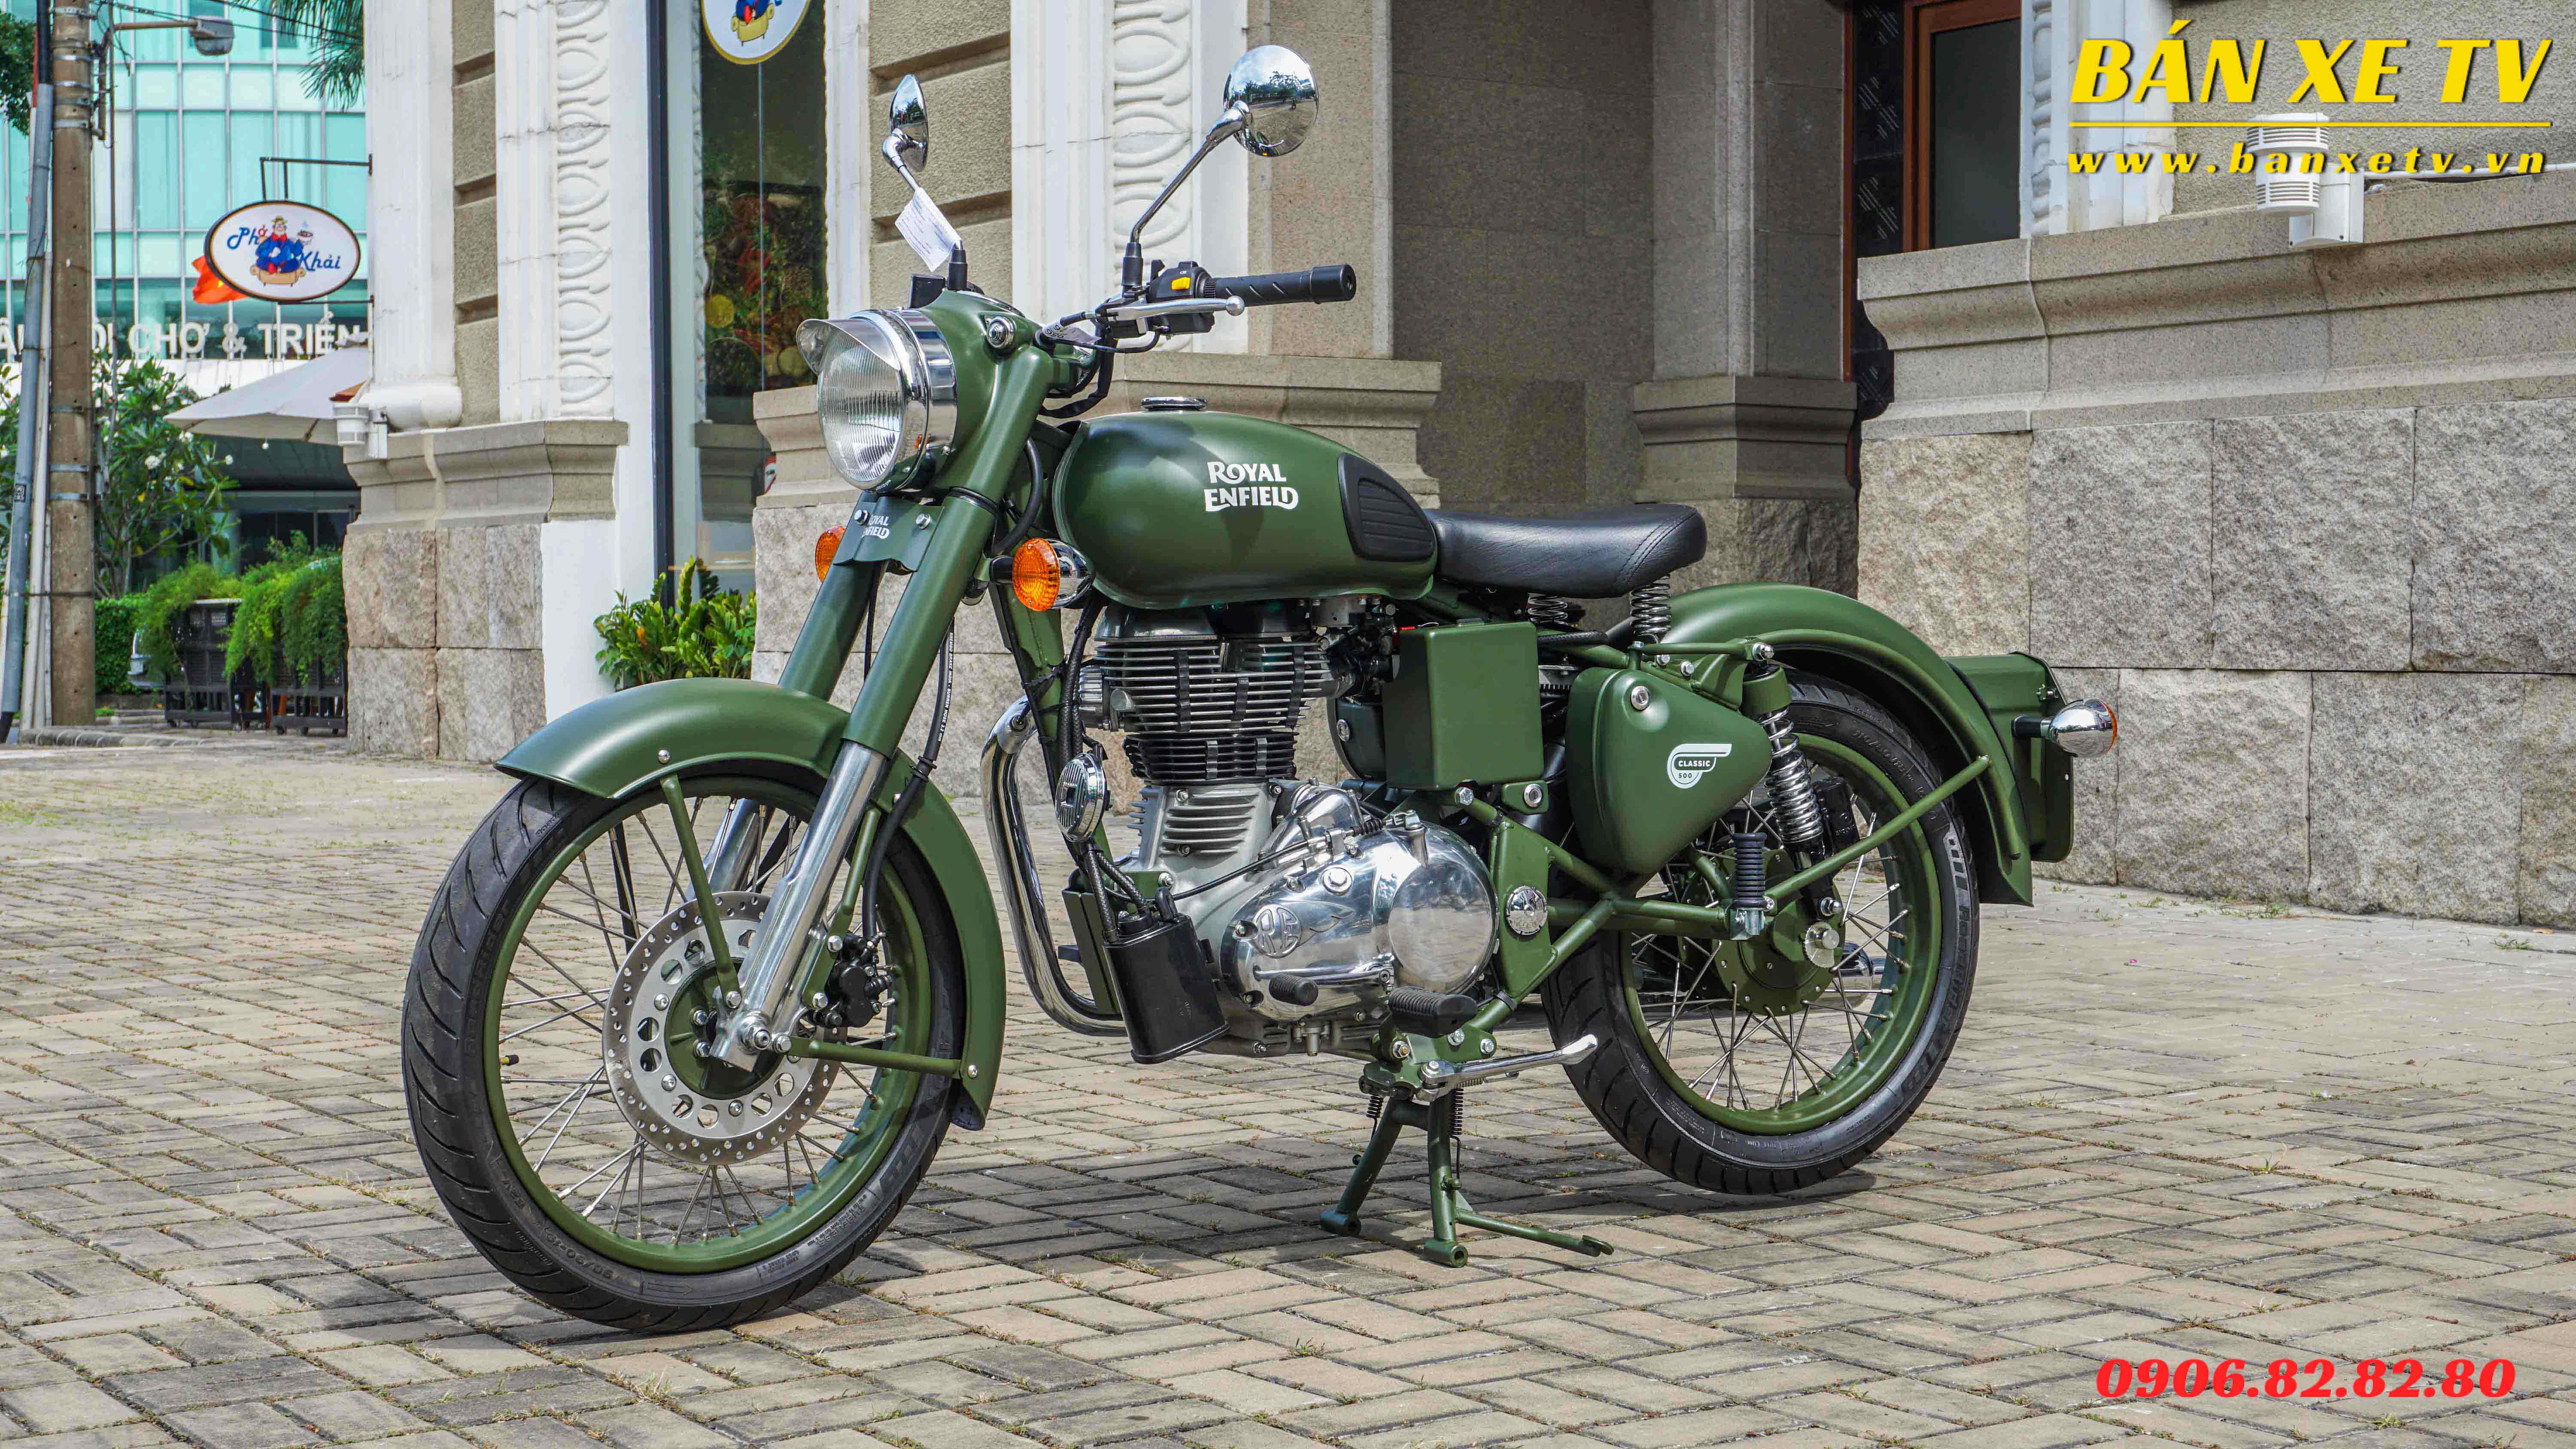 Royal Enfield Classic 500 Battle Green In Viet Nam Wallpaper & Background Download